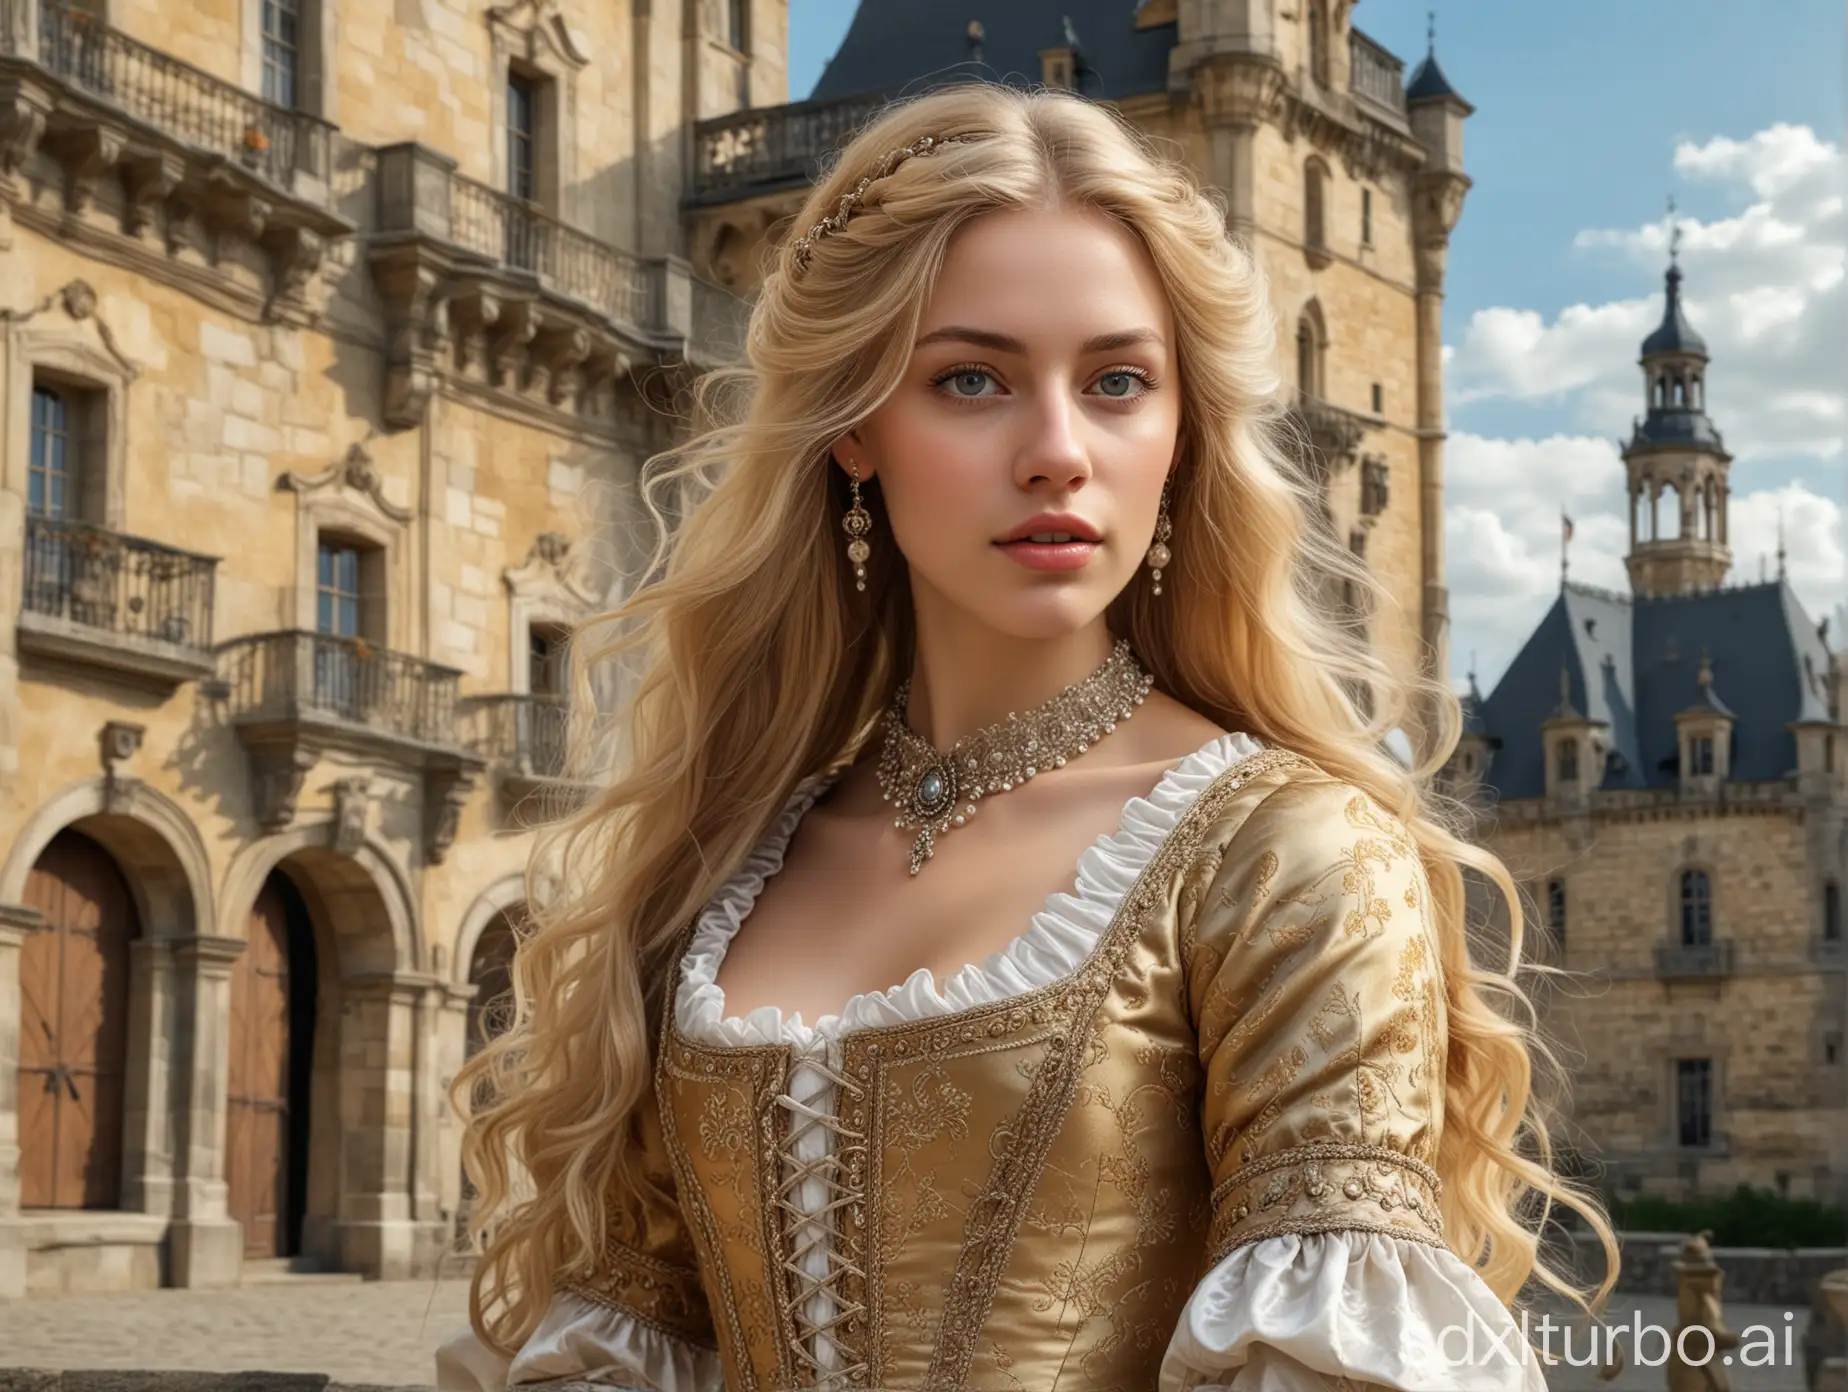 HyperRealistic-Portrait-of-Young-Blonde-Woman-in-Baroque-Attire-Before-Castle